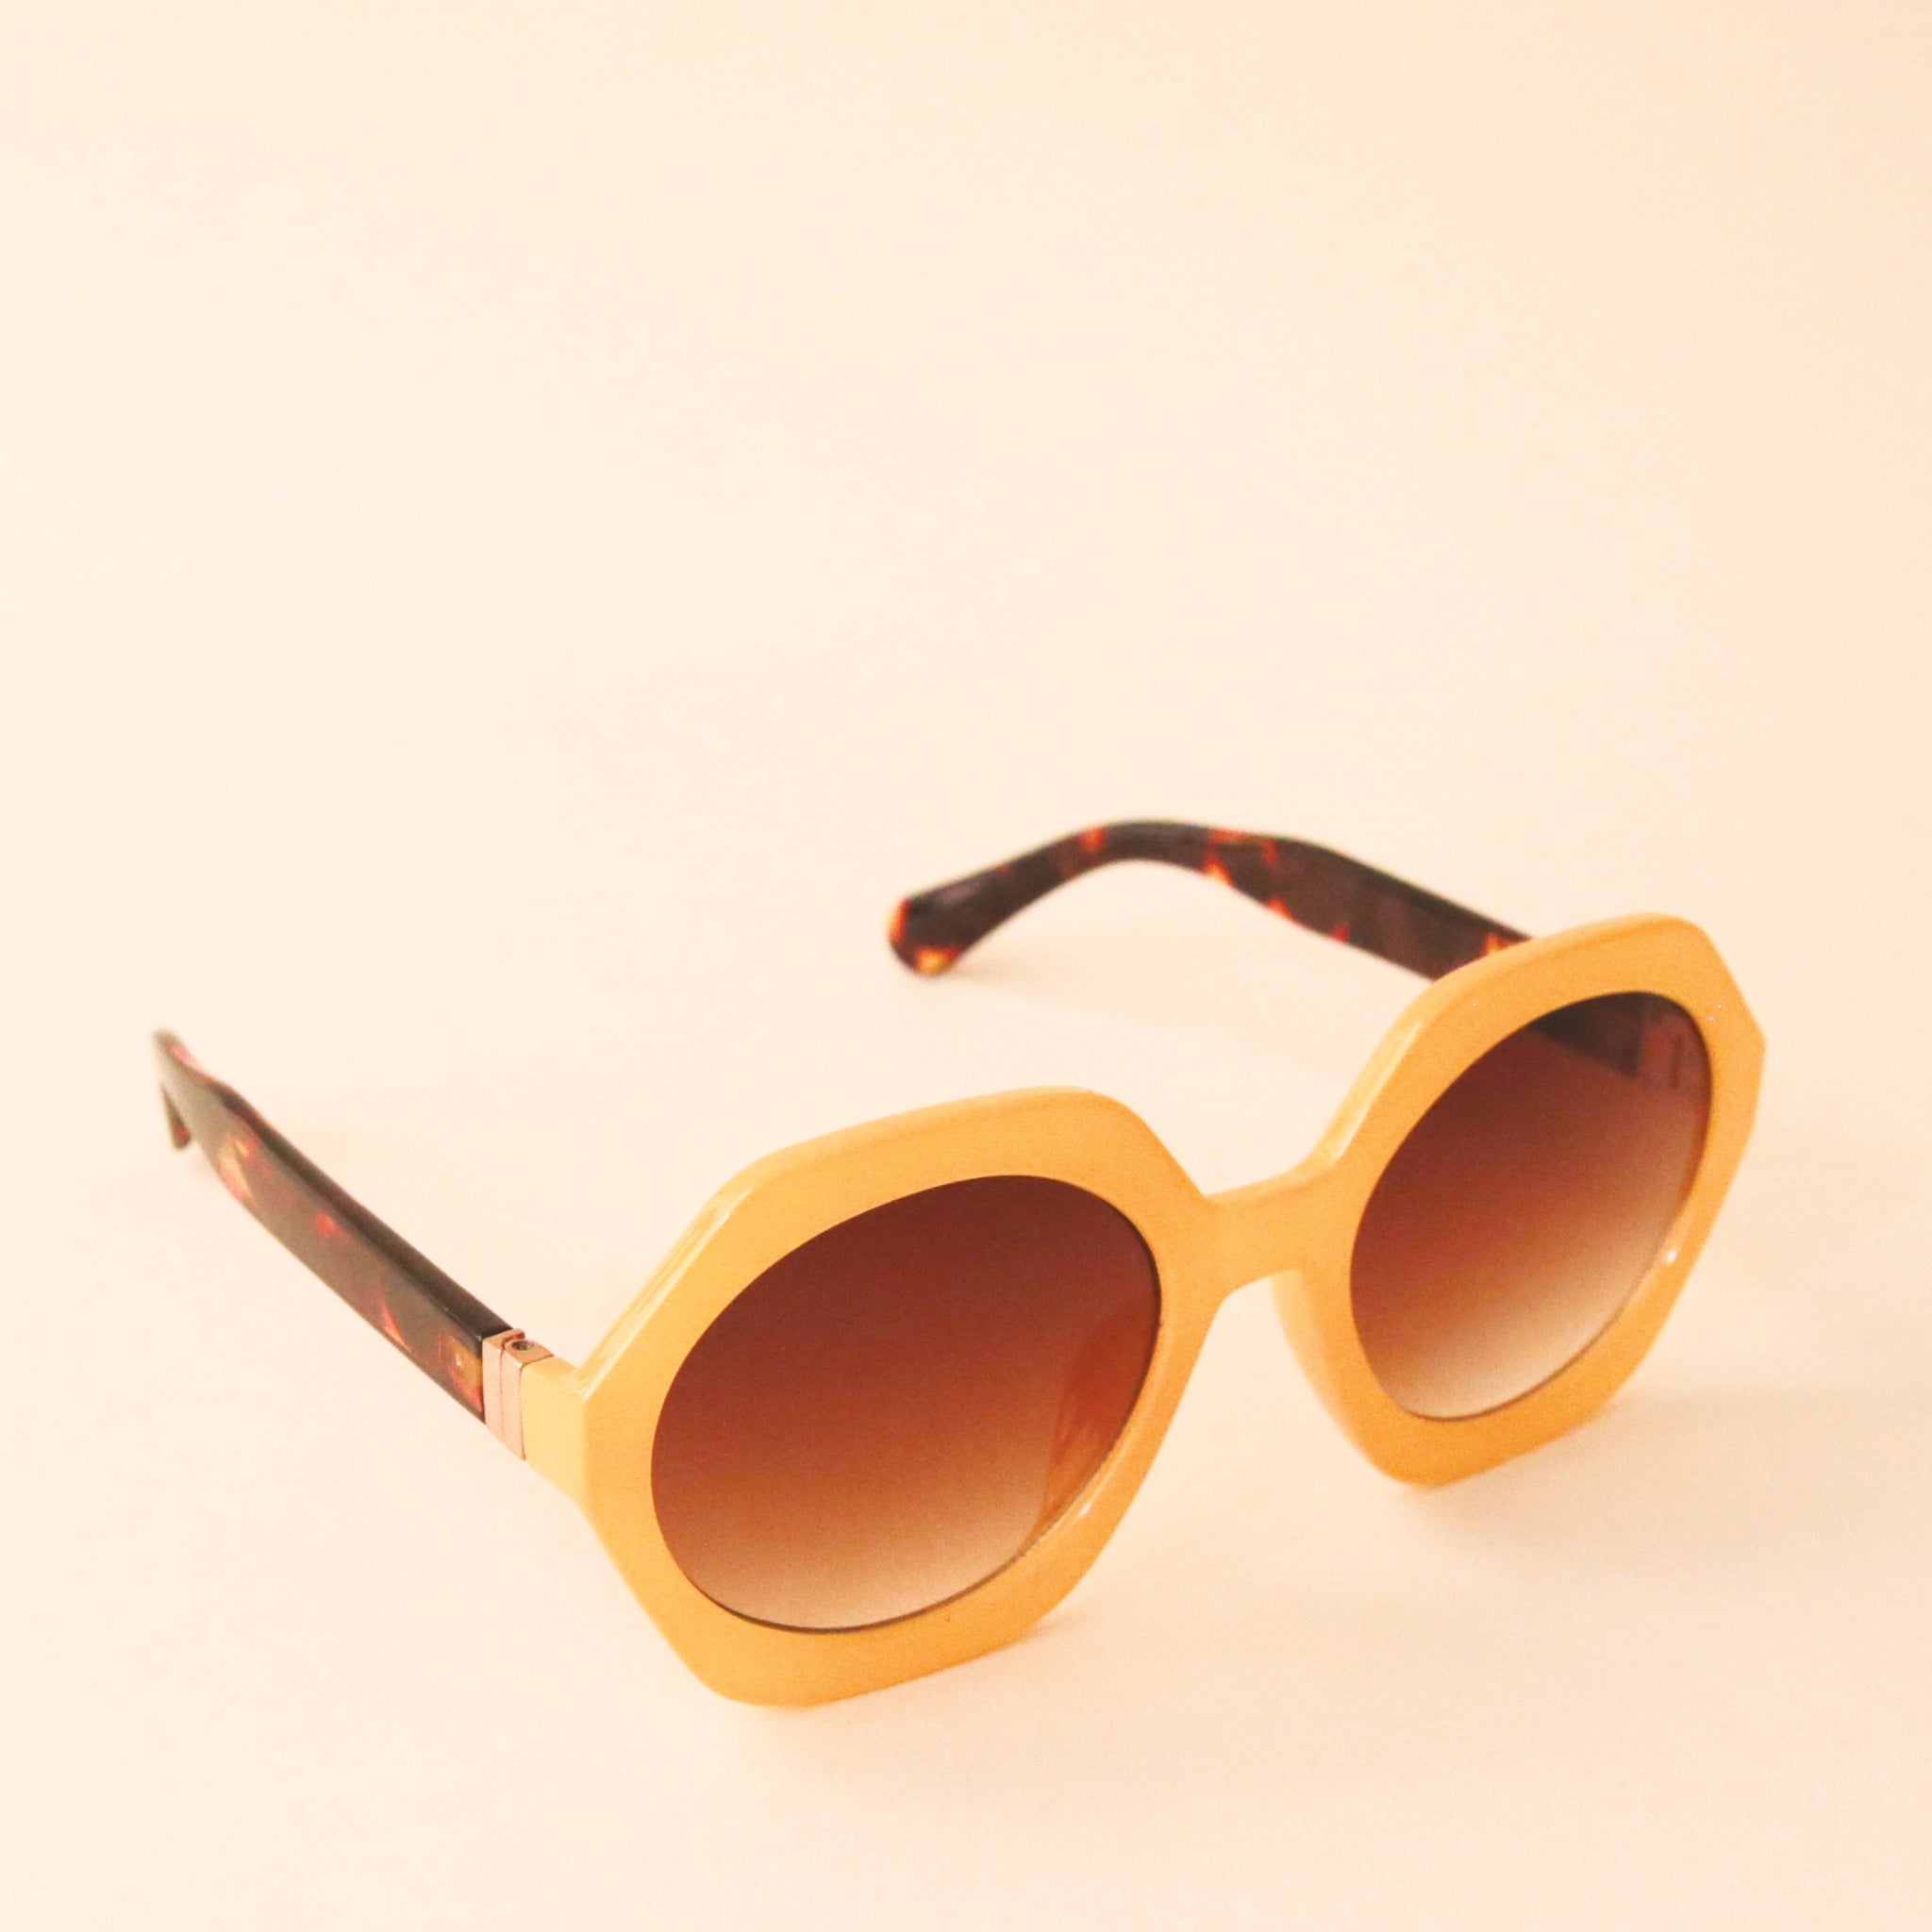 Mustard yellow circular frame sunglasses with a brown lens and tortoise arms photographed in front of a peachy background.